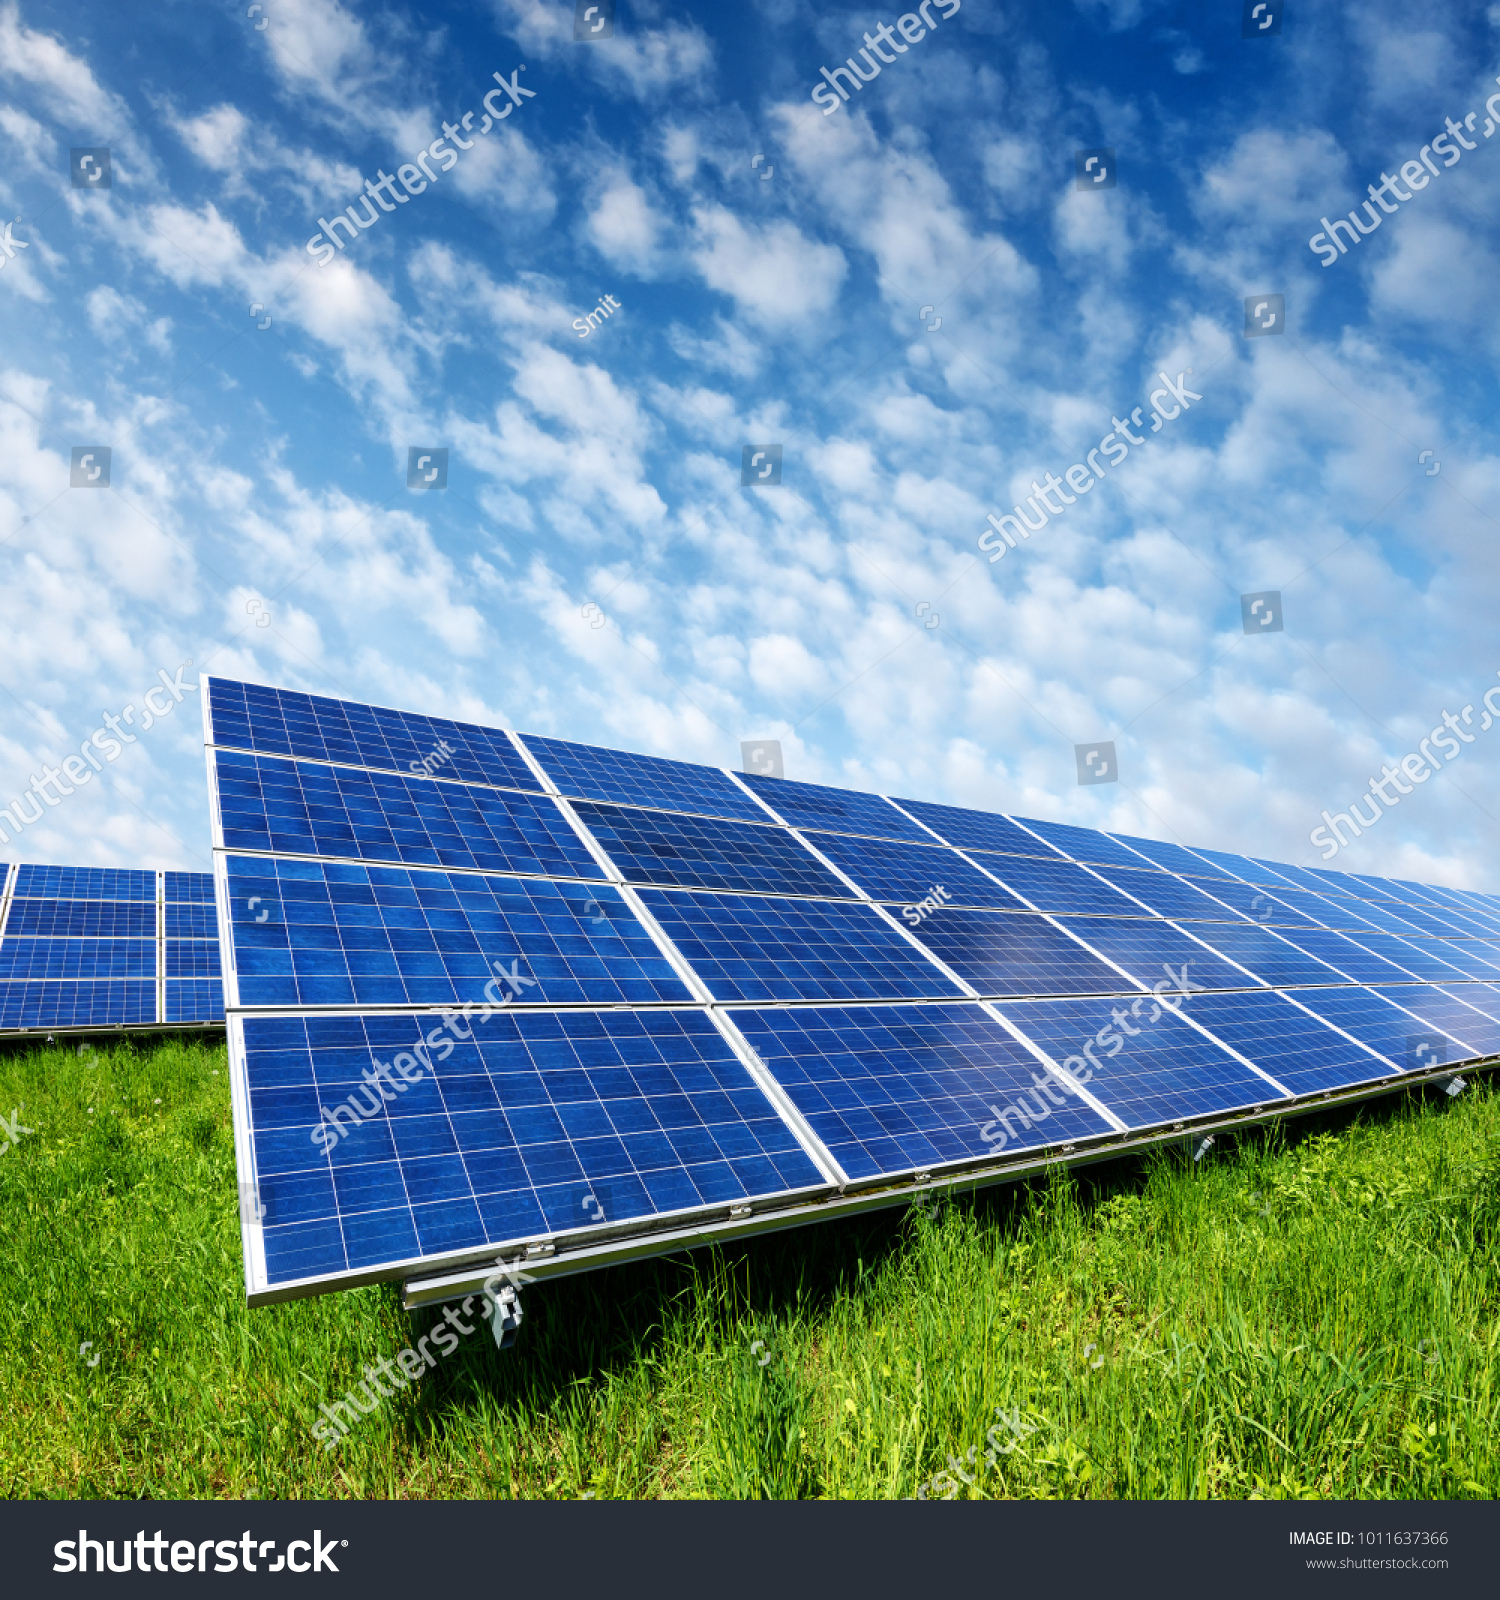 Solar panel on blue sky background. Green grass and cloudy sky. Alternative energy concept #1011637366